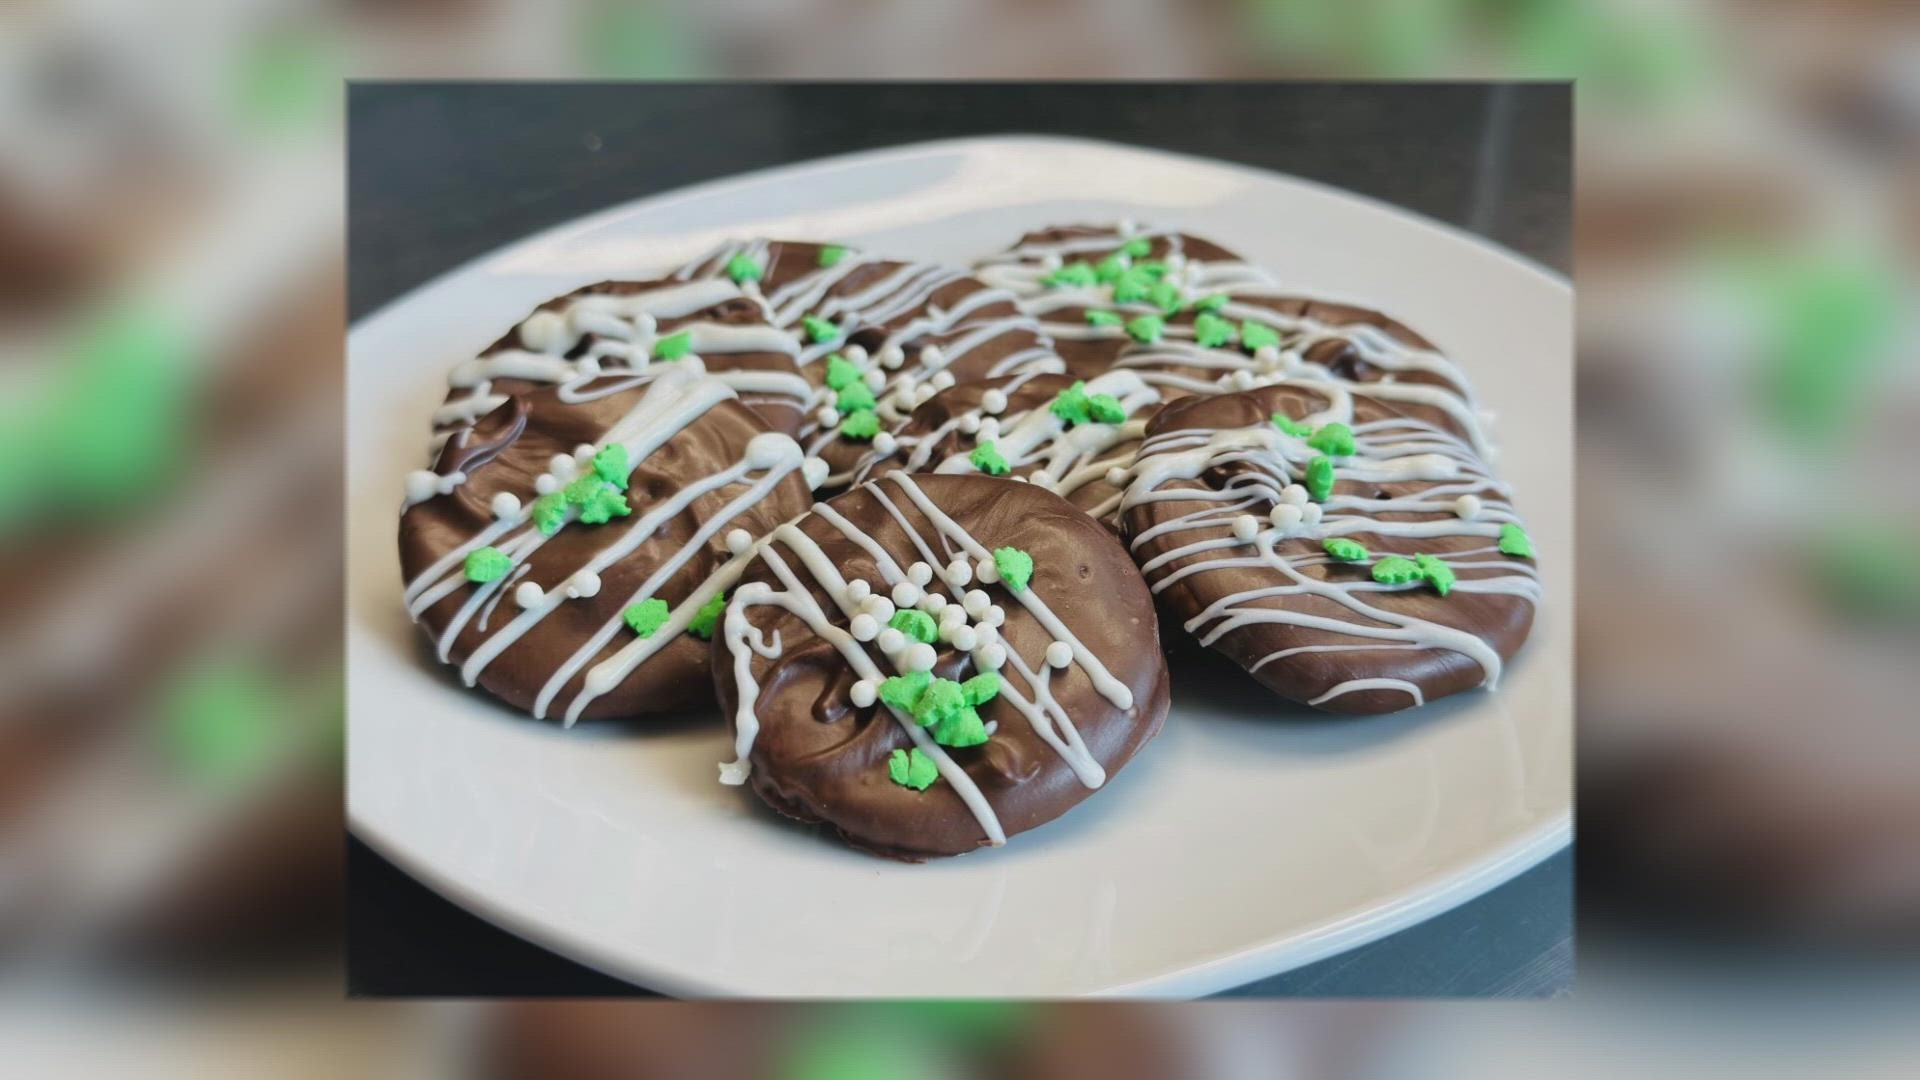 If you love thin mints, you'll love this spin on them!